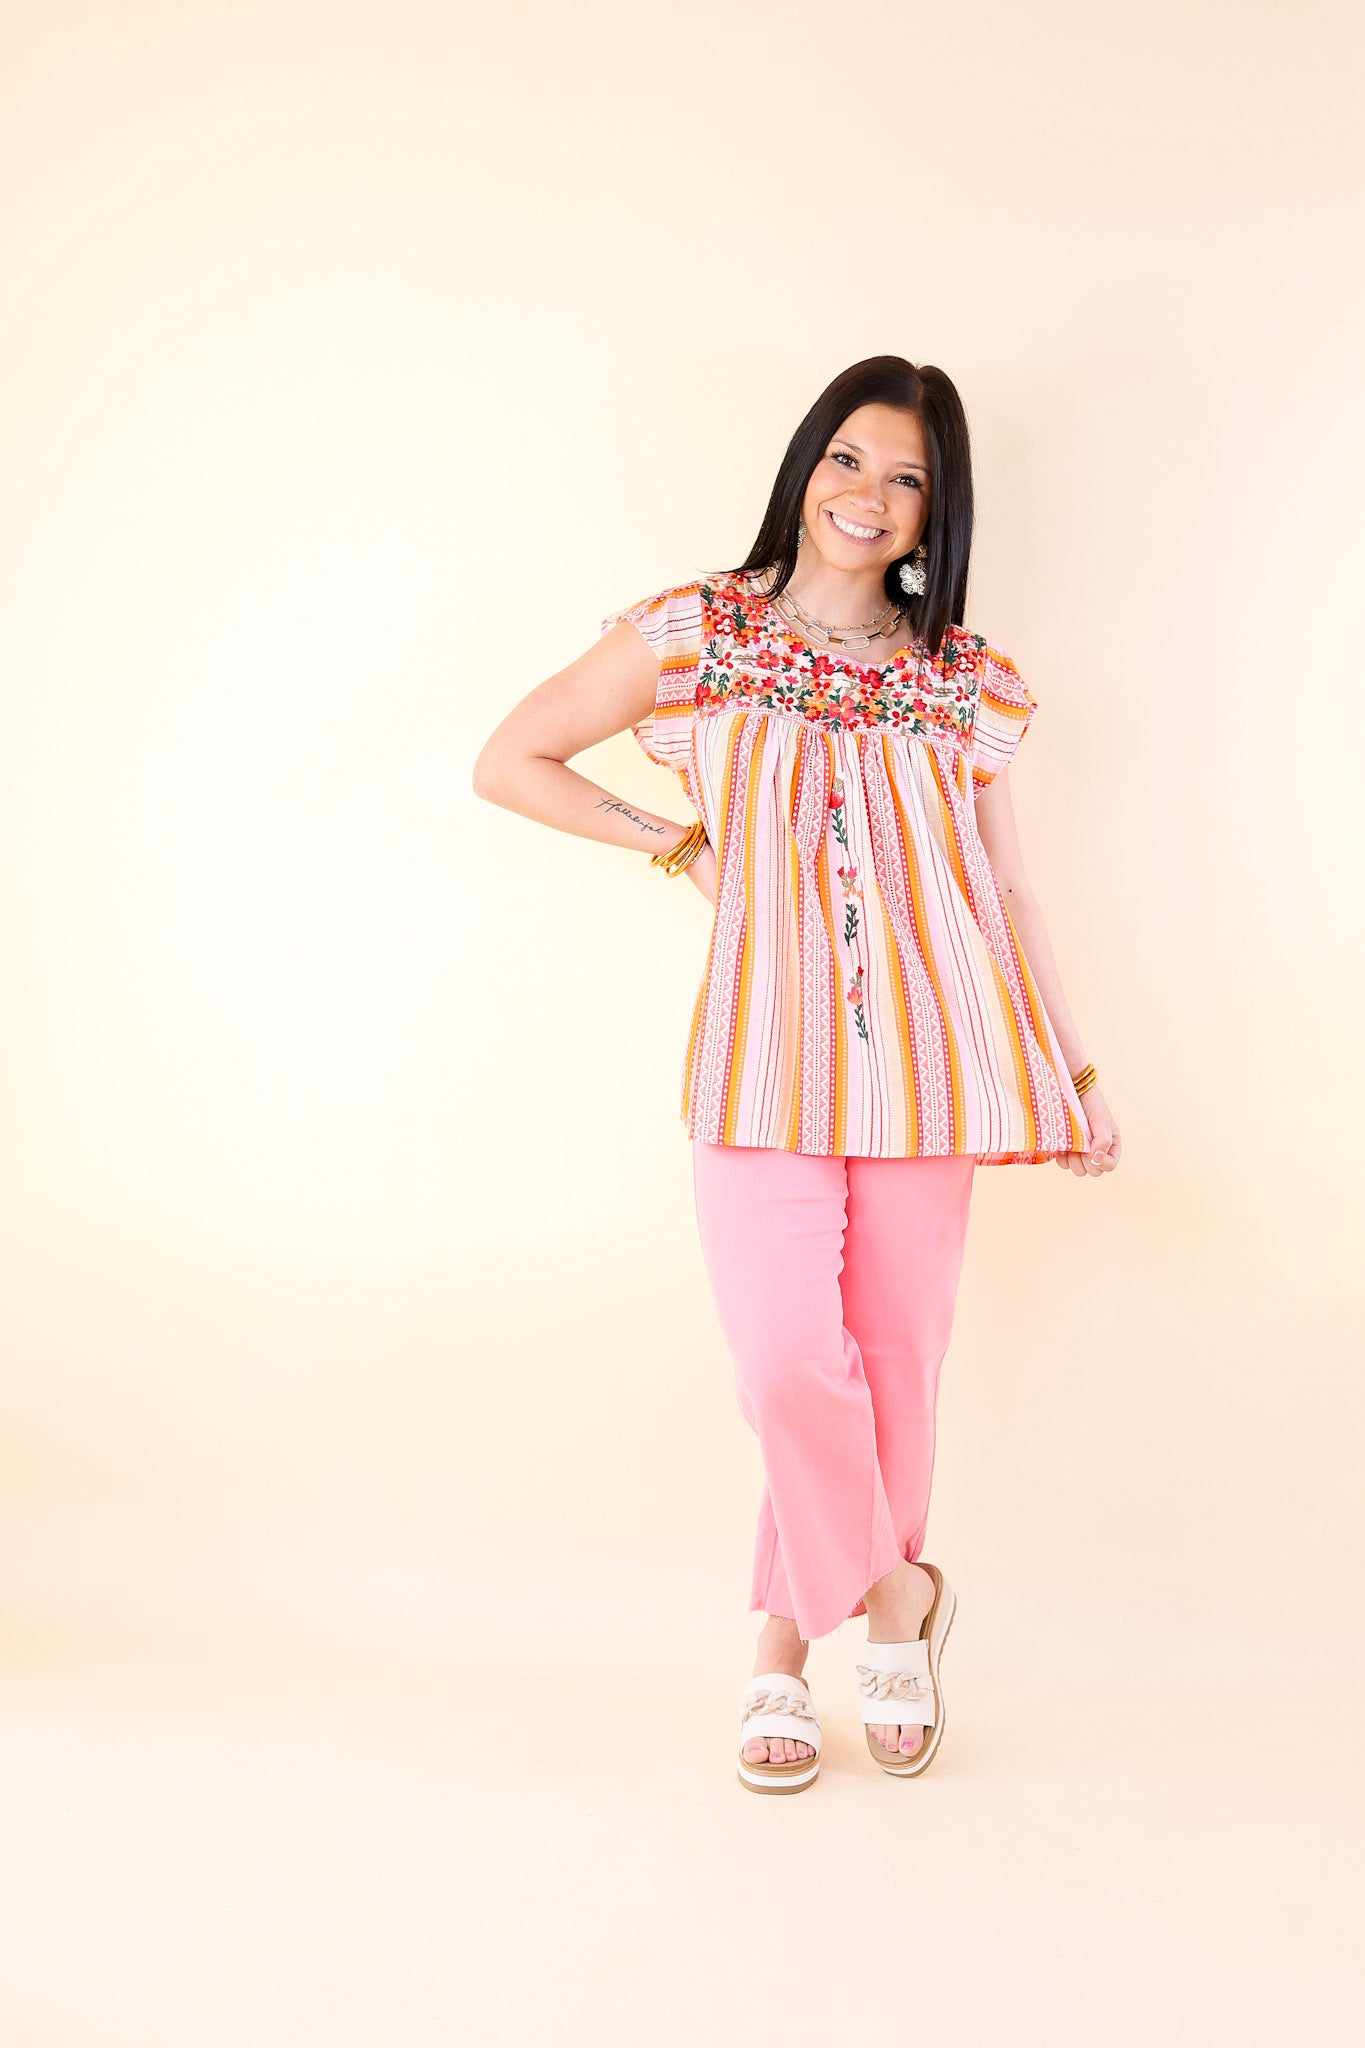 Lajitas Lady Striped Babydoll Top with Floral Embroidery in Orange and Pink - Giddy Up Glamour Boutique